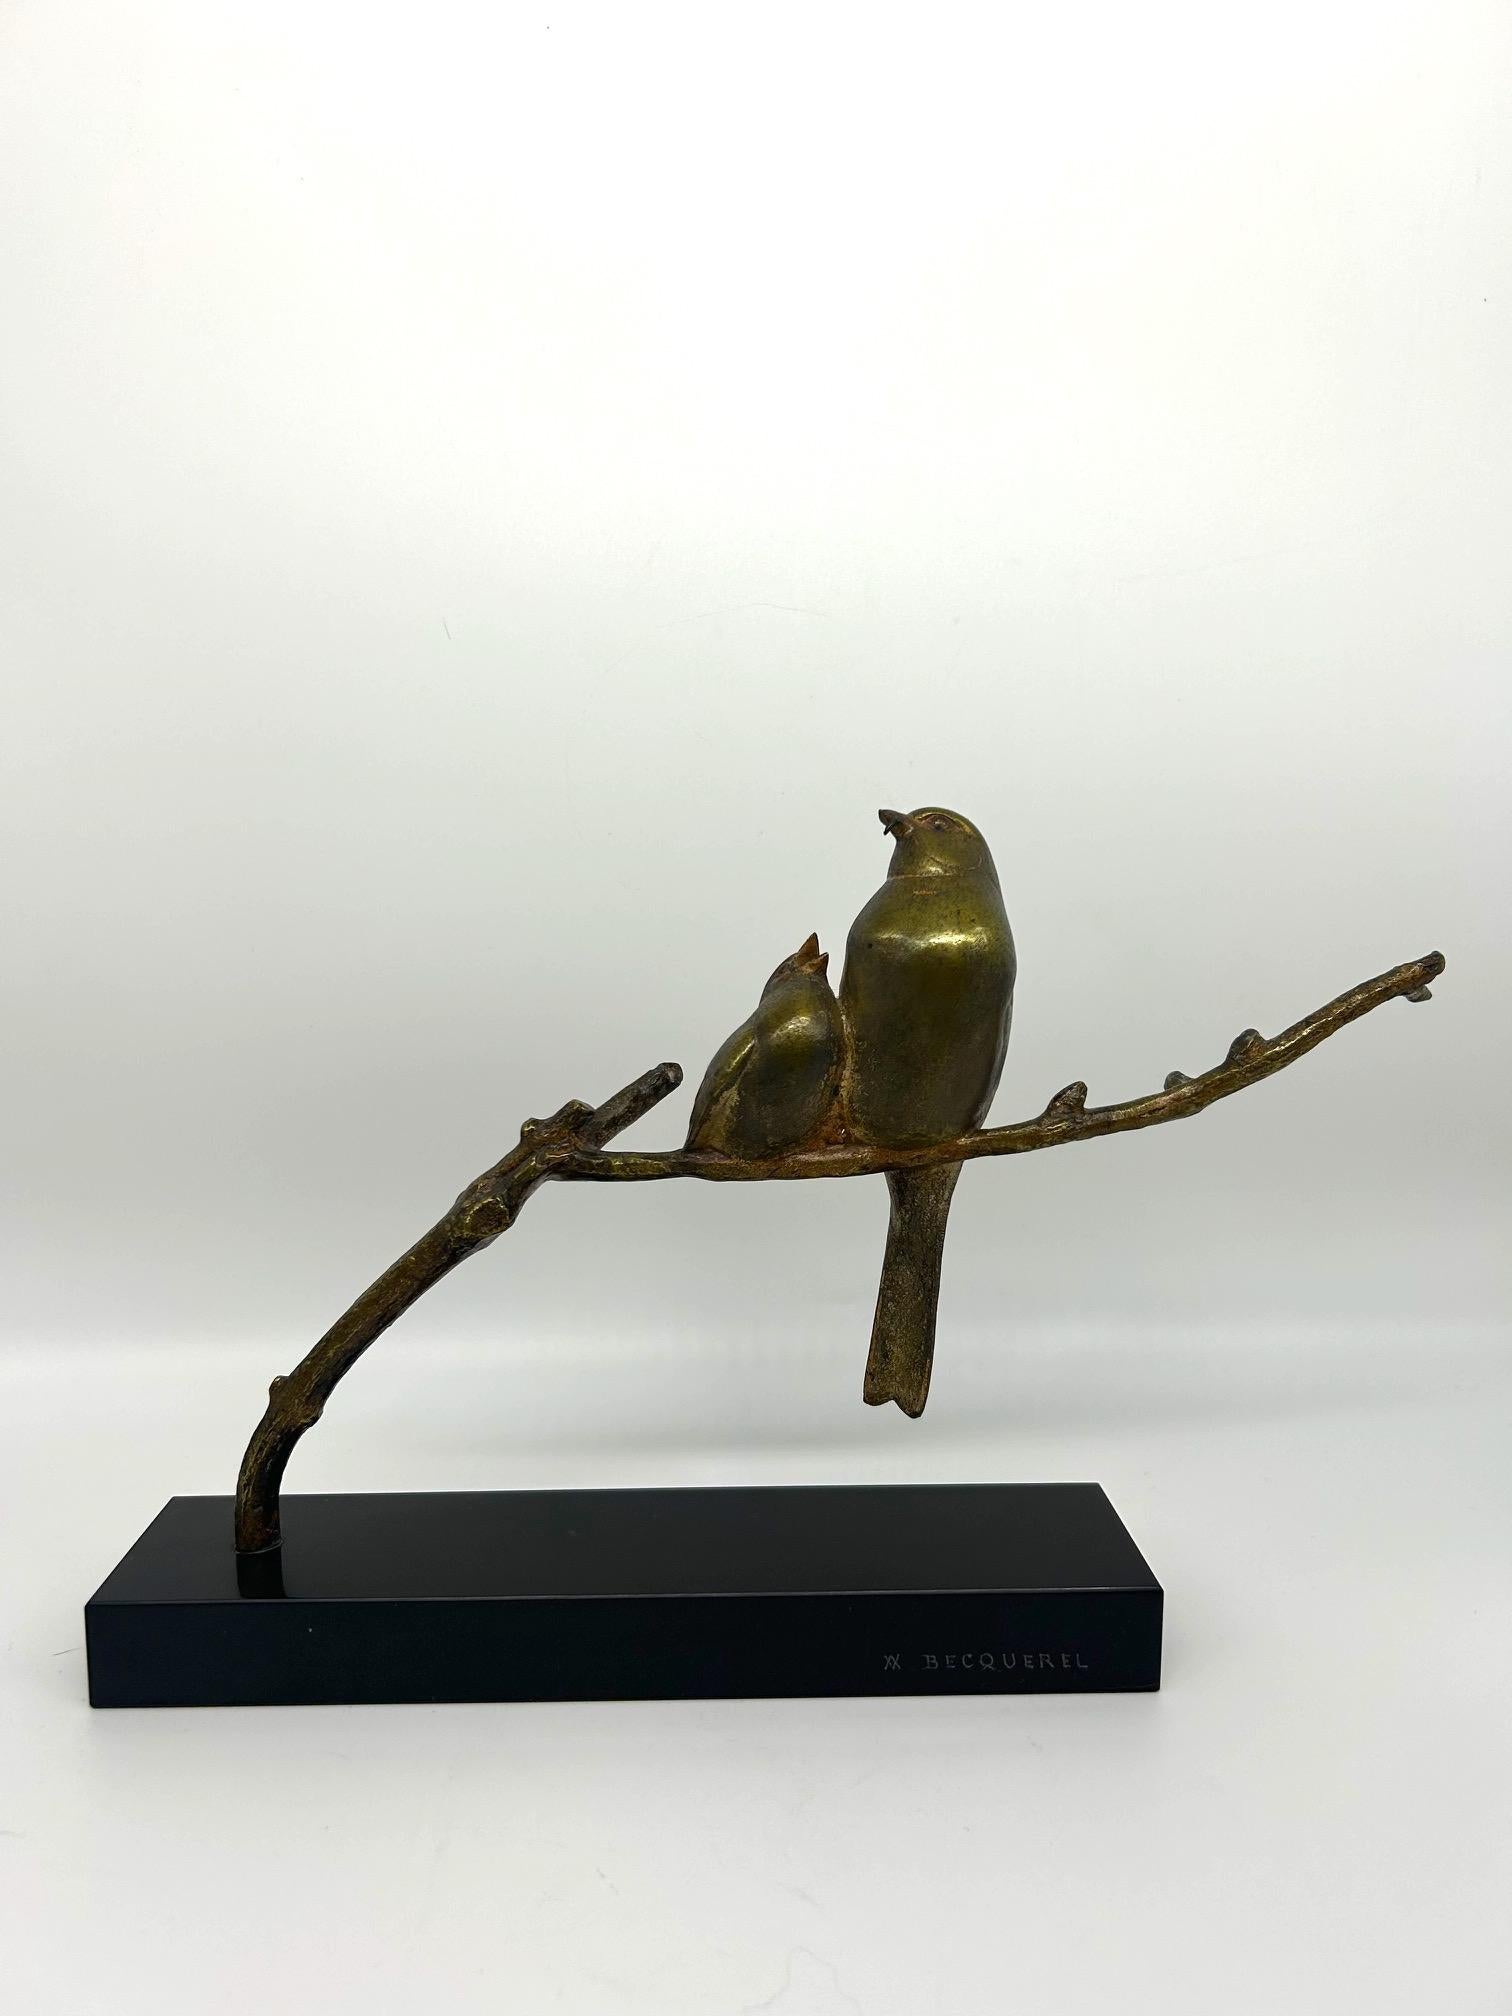 art deco sculpture of birds on a branch with patented bronze on a black marble base 
signed by the artist André Vincent Becquerel 